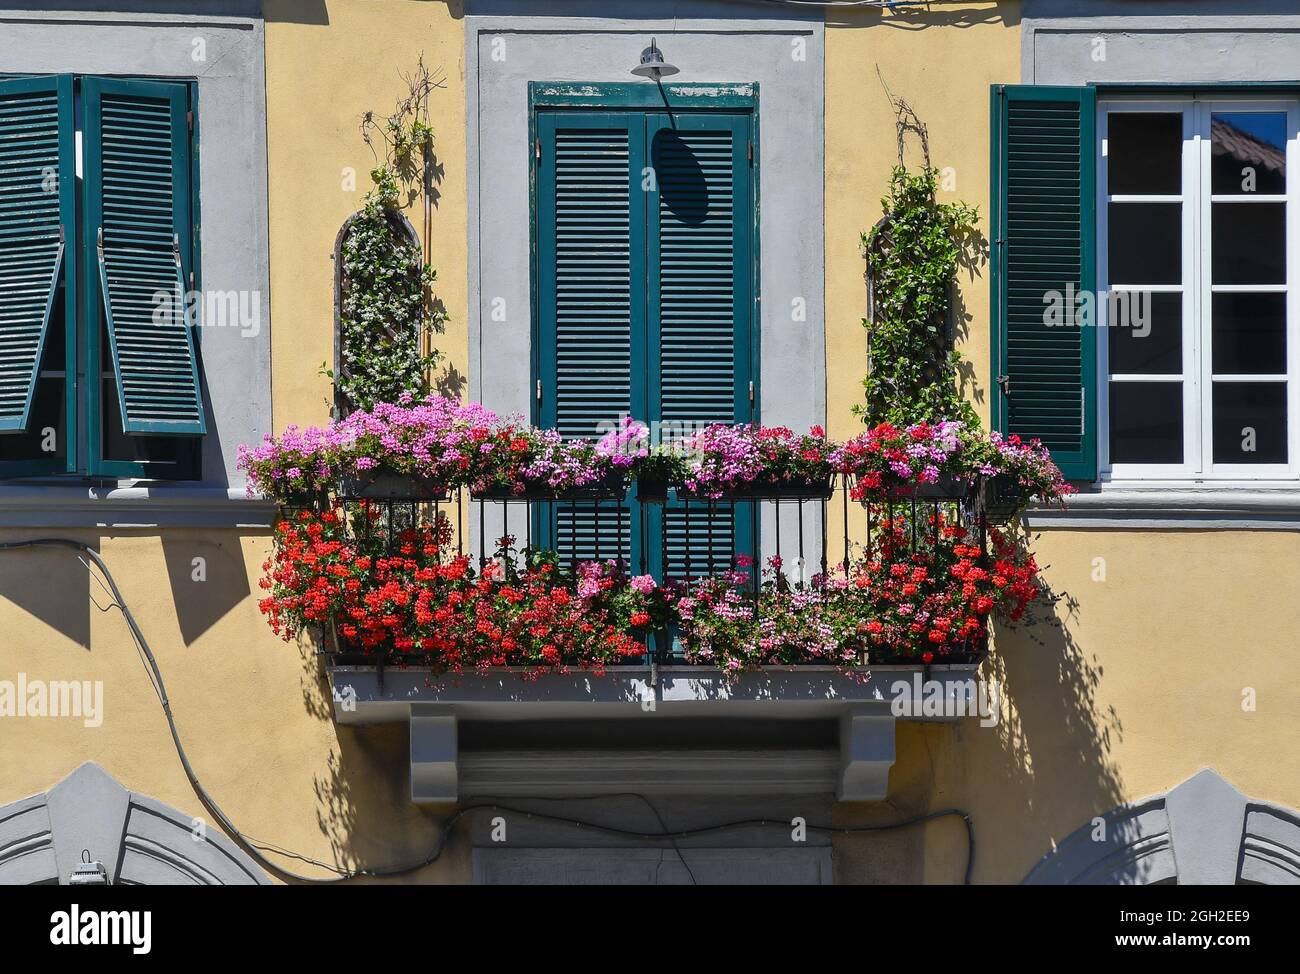 Exterior of a house with a balcony full of flowerpots of geraniums in bloom and climbing jasmines, Livorno, Tuscany, Italy Stock Photo